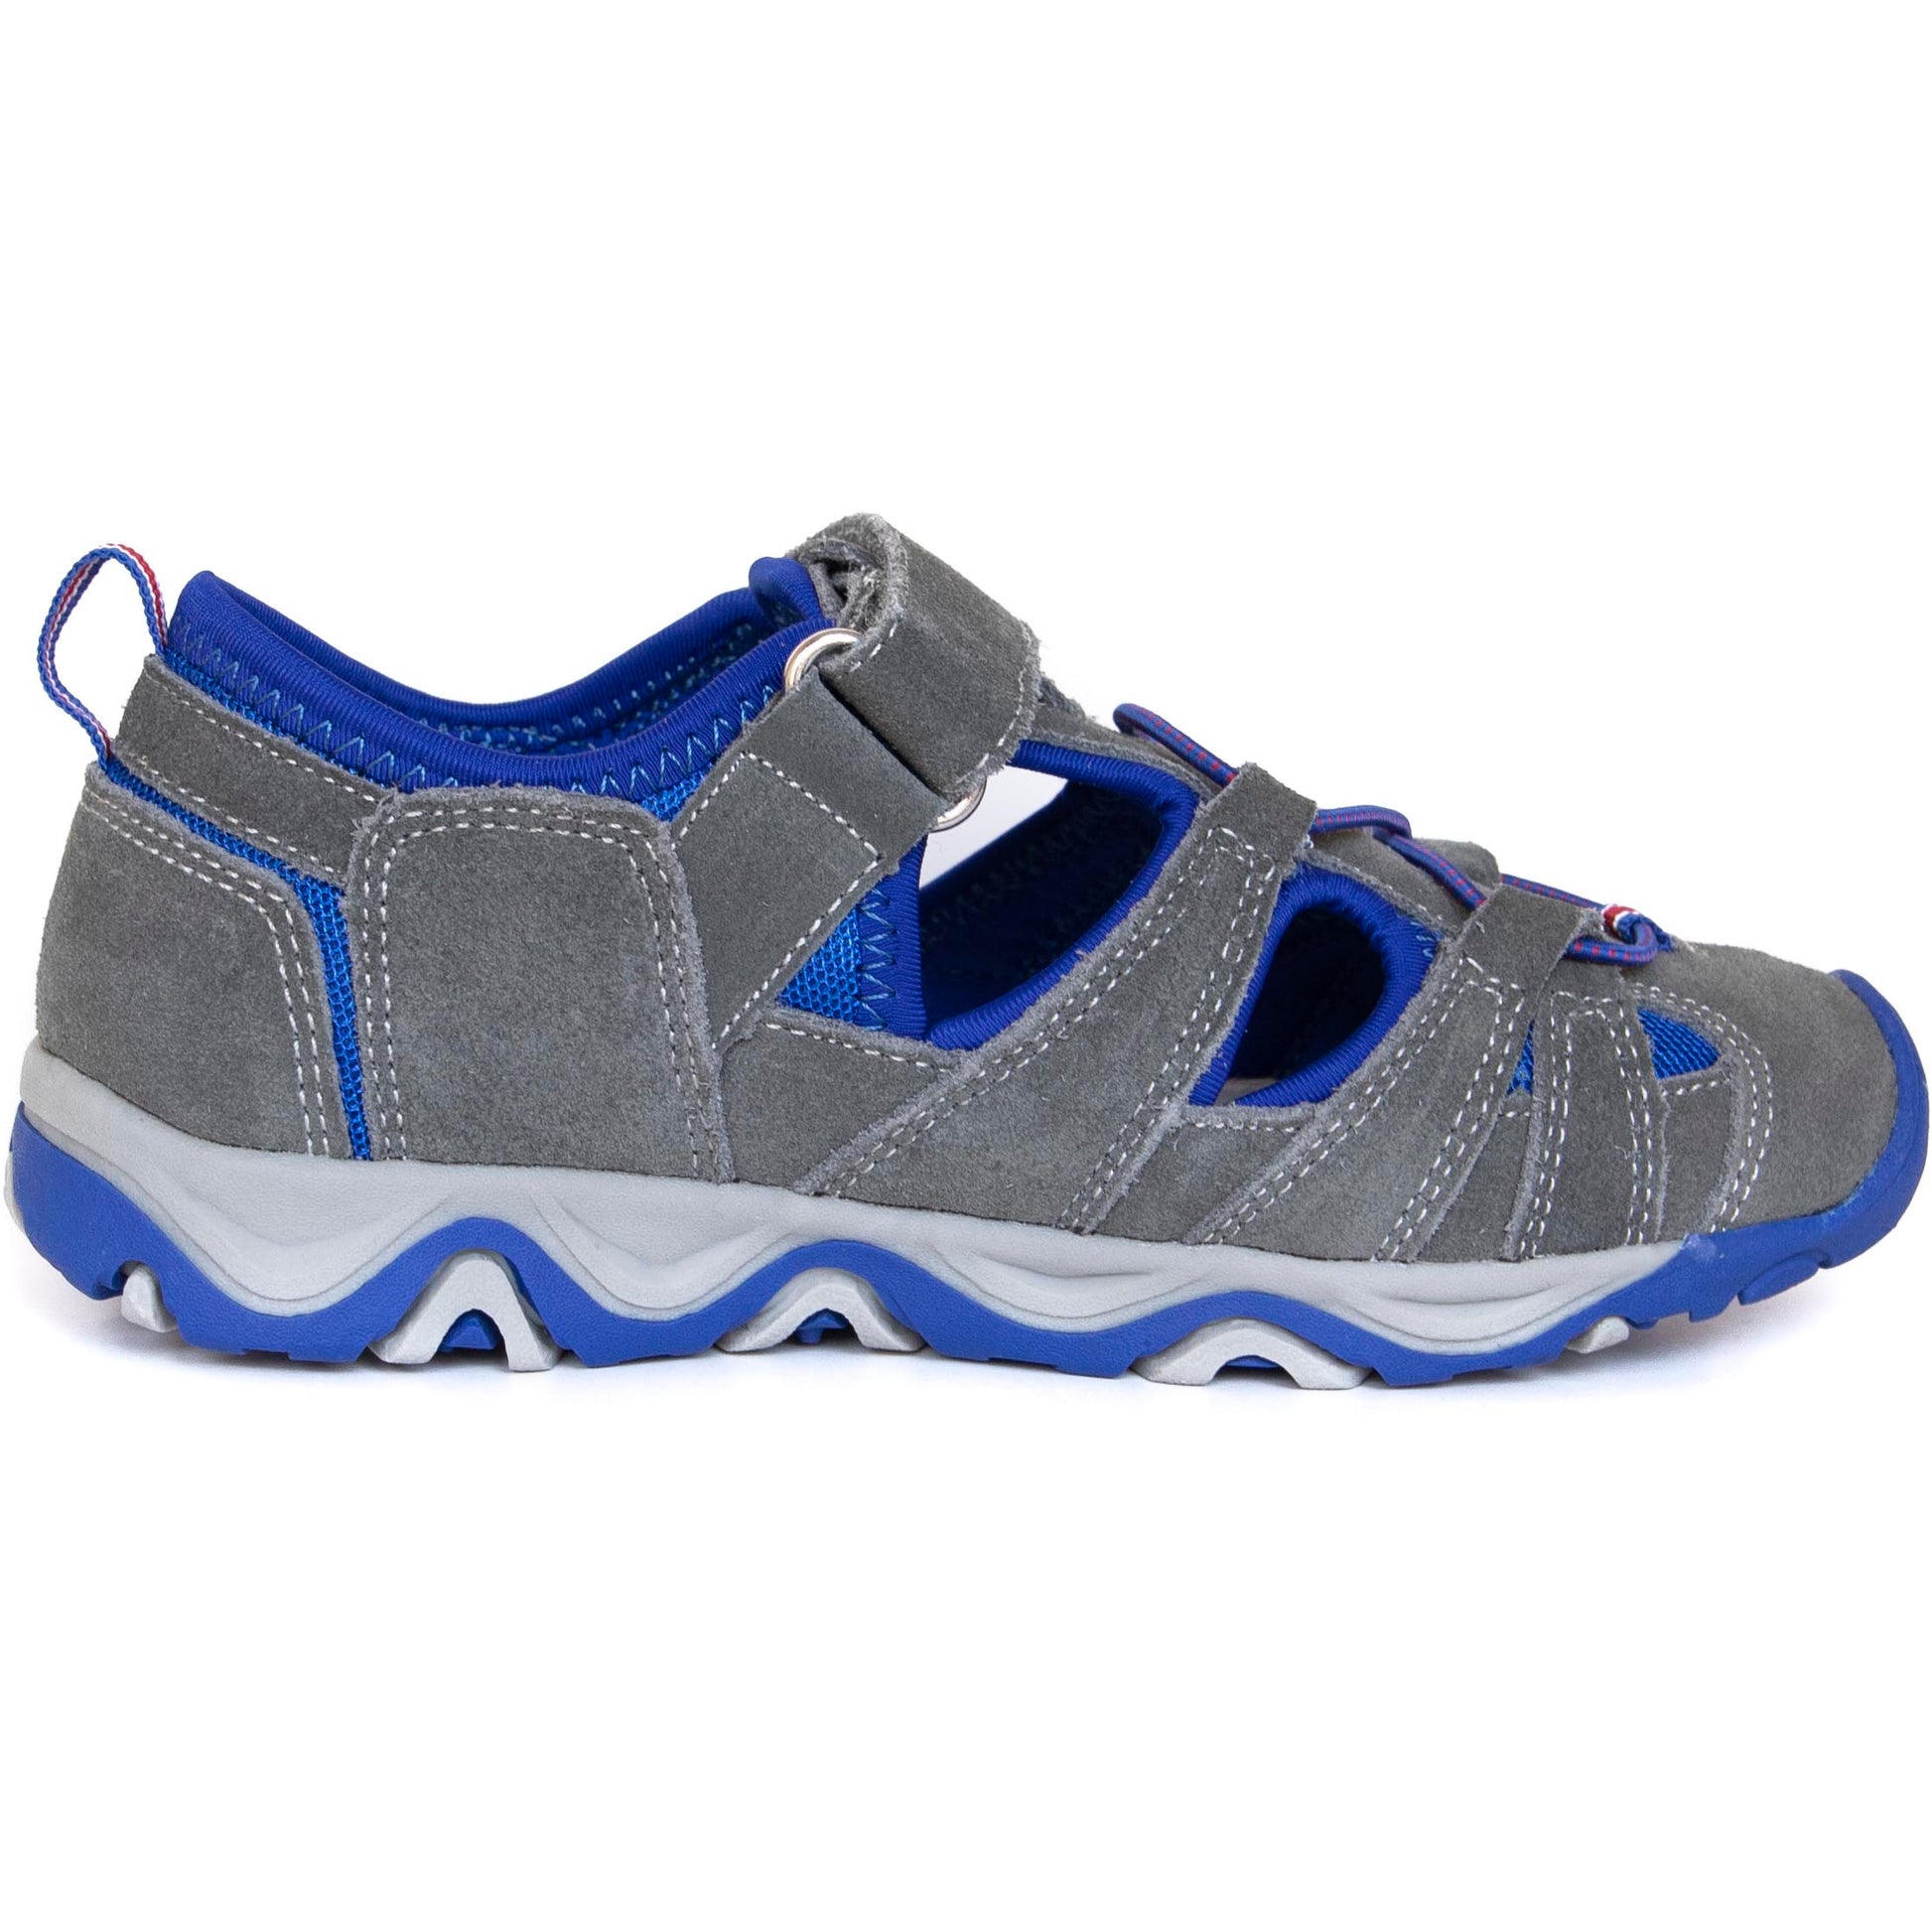 Genuine leather sportive sandals for older boys, with a closed toe box and ventilation holes.